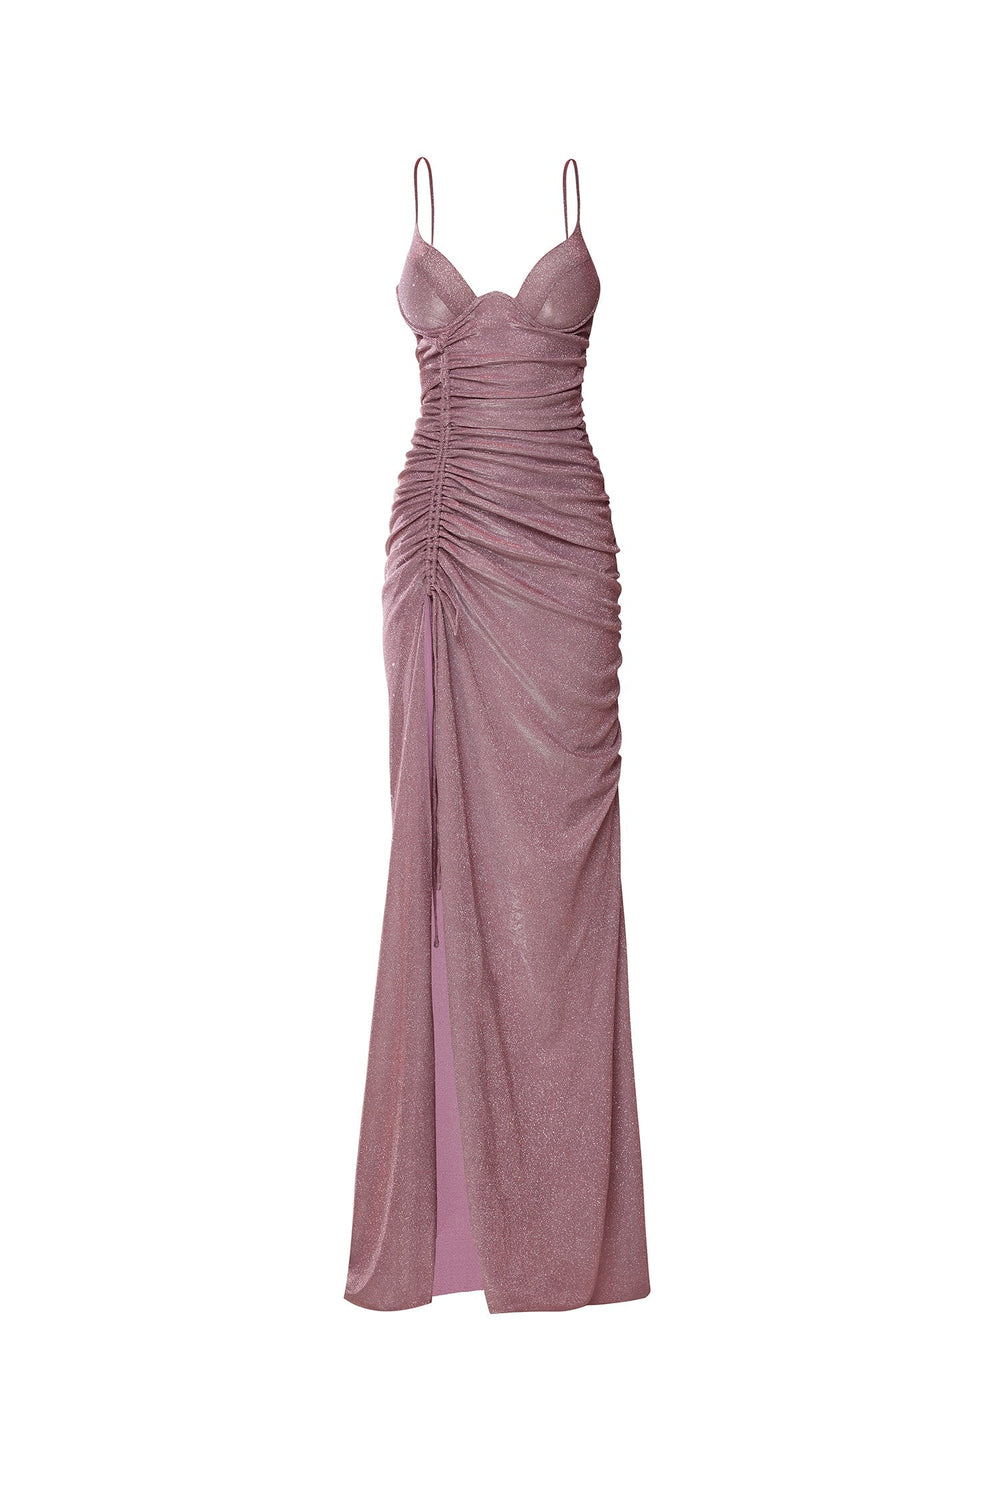 Henriette - Lilac Ruched Glitter Gown with Criss Cross Back